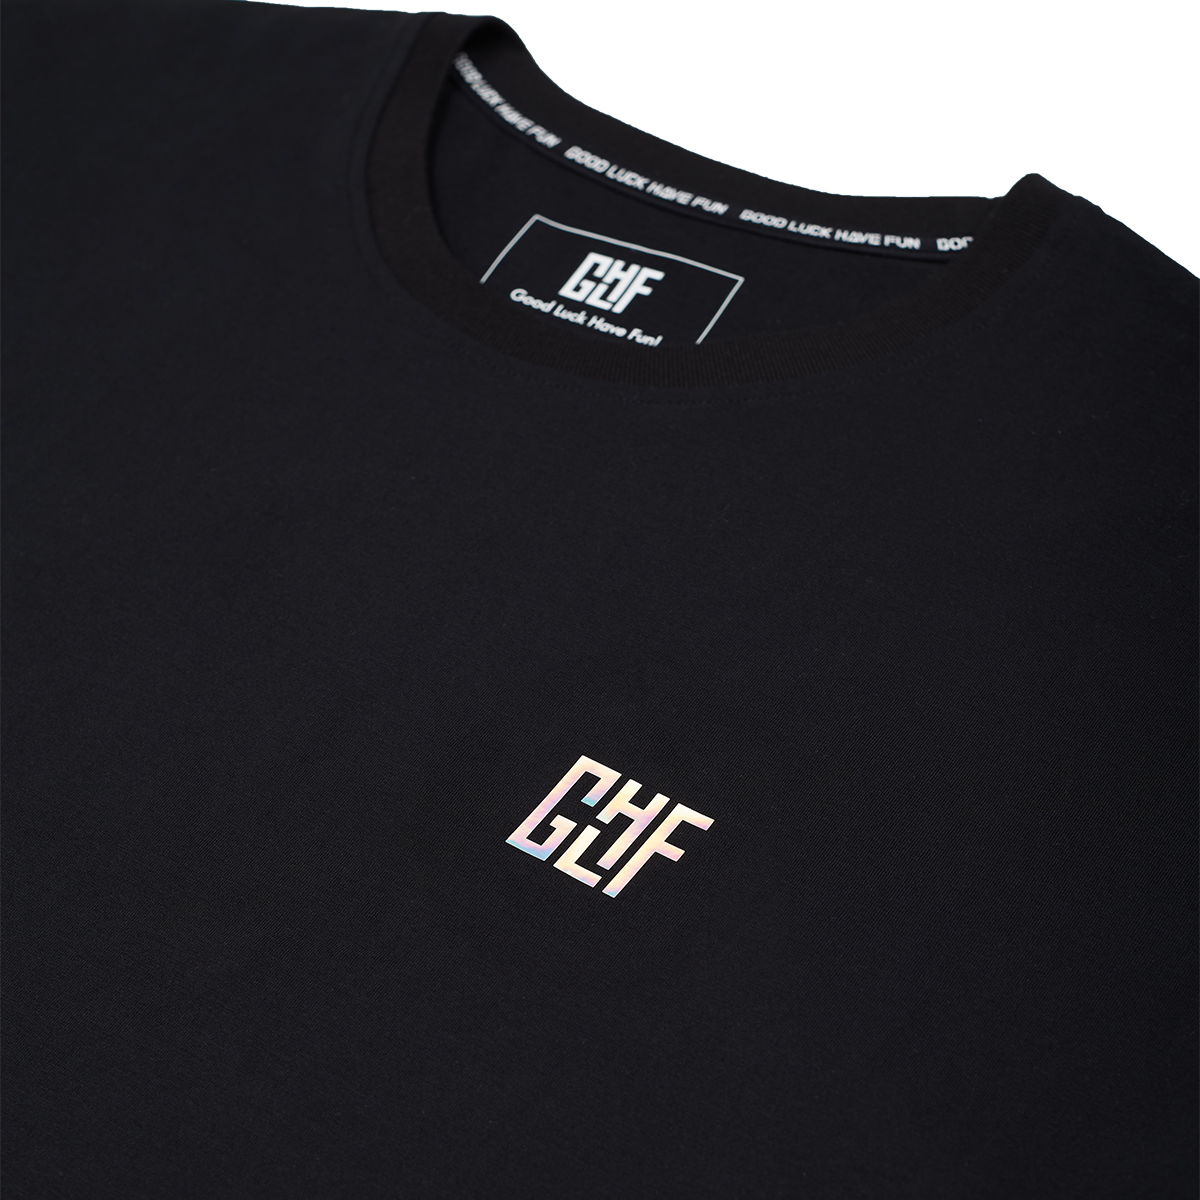 Logo Oversize Holografisches (S/M) T-Shirt